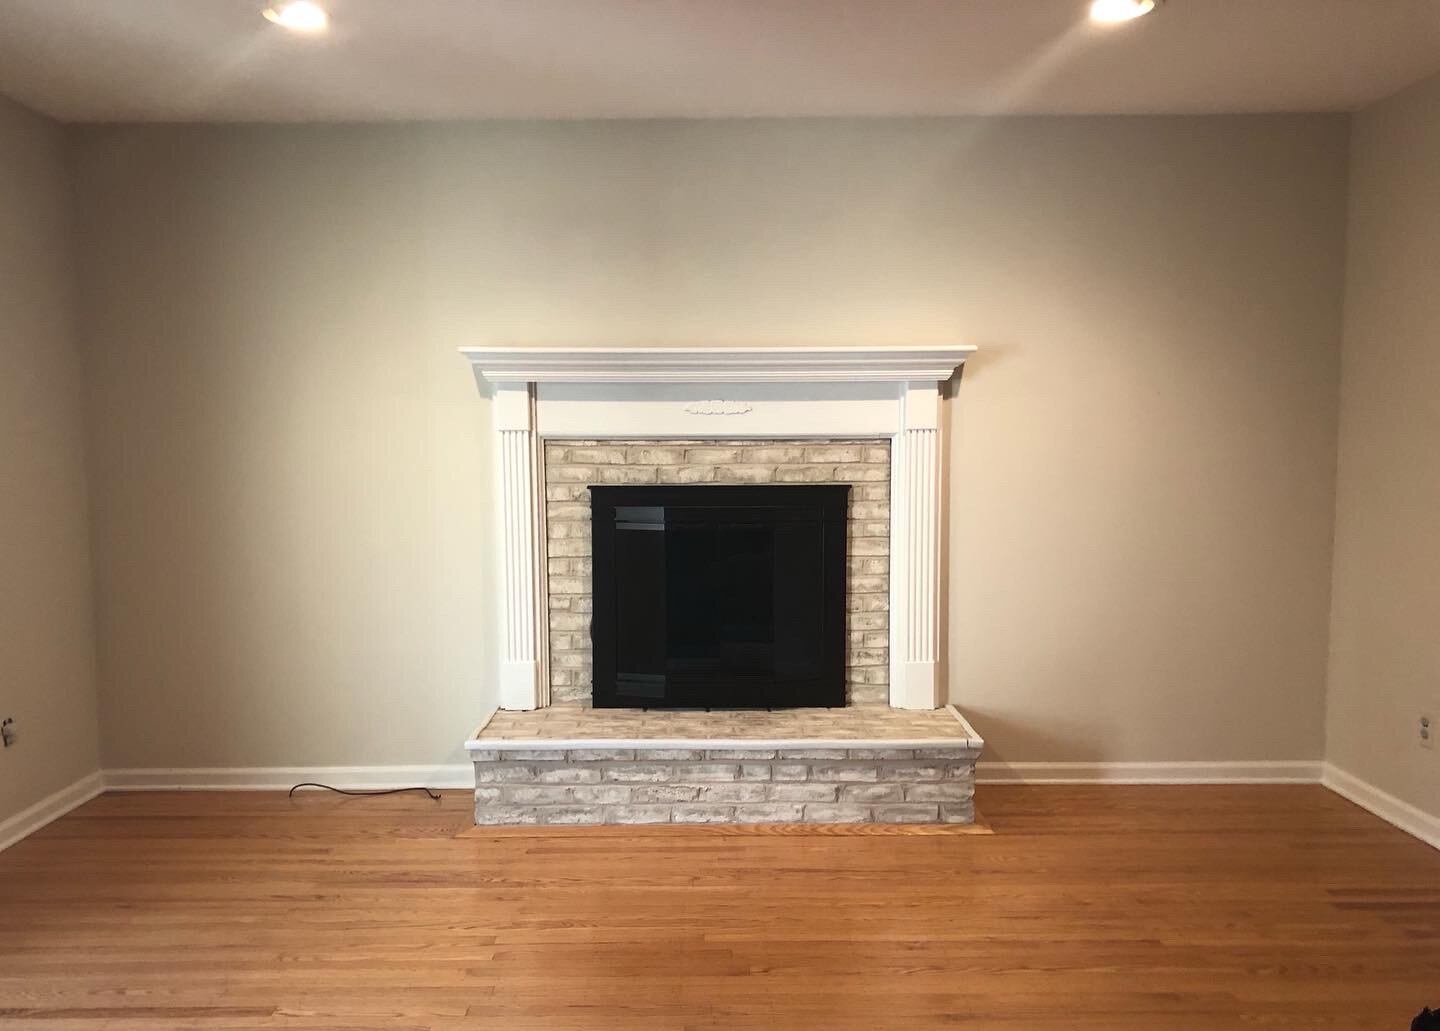  A client contacted me to create a set of built-ins flanking their existing fireplace. This was the space before I started. 